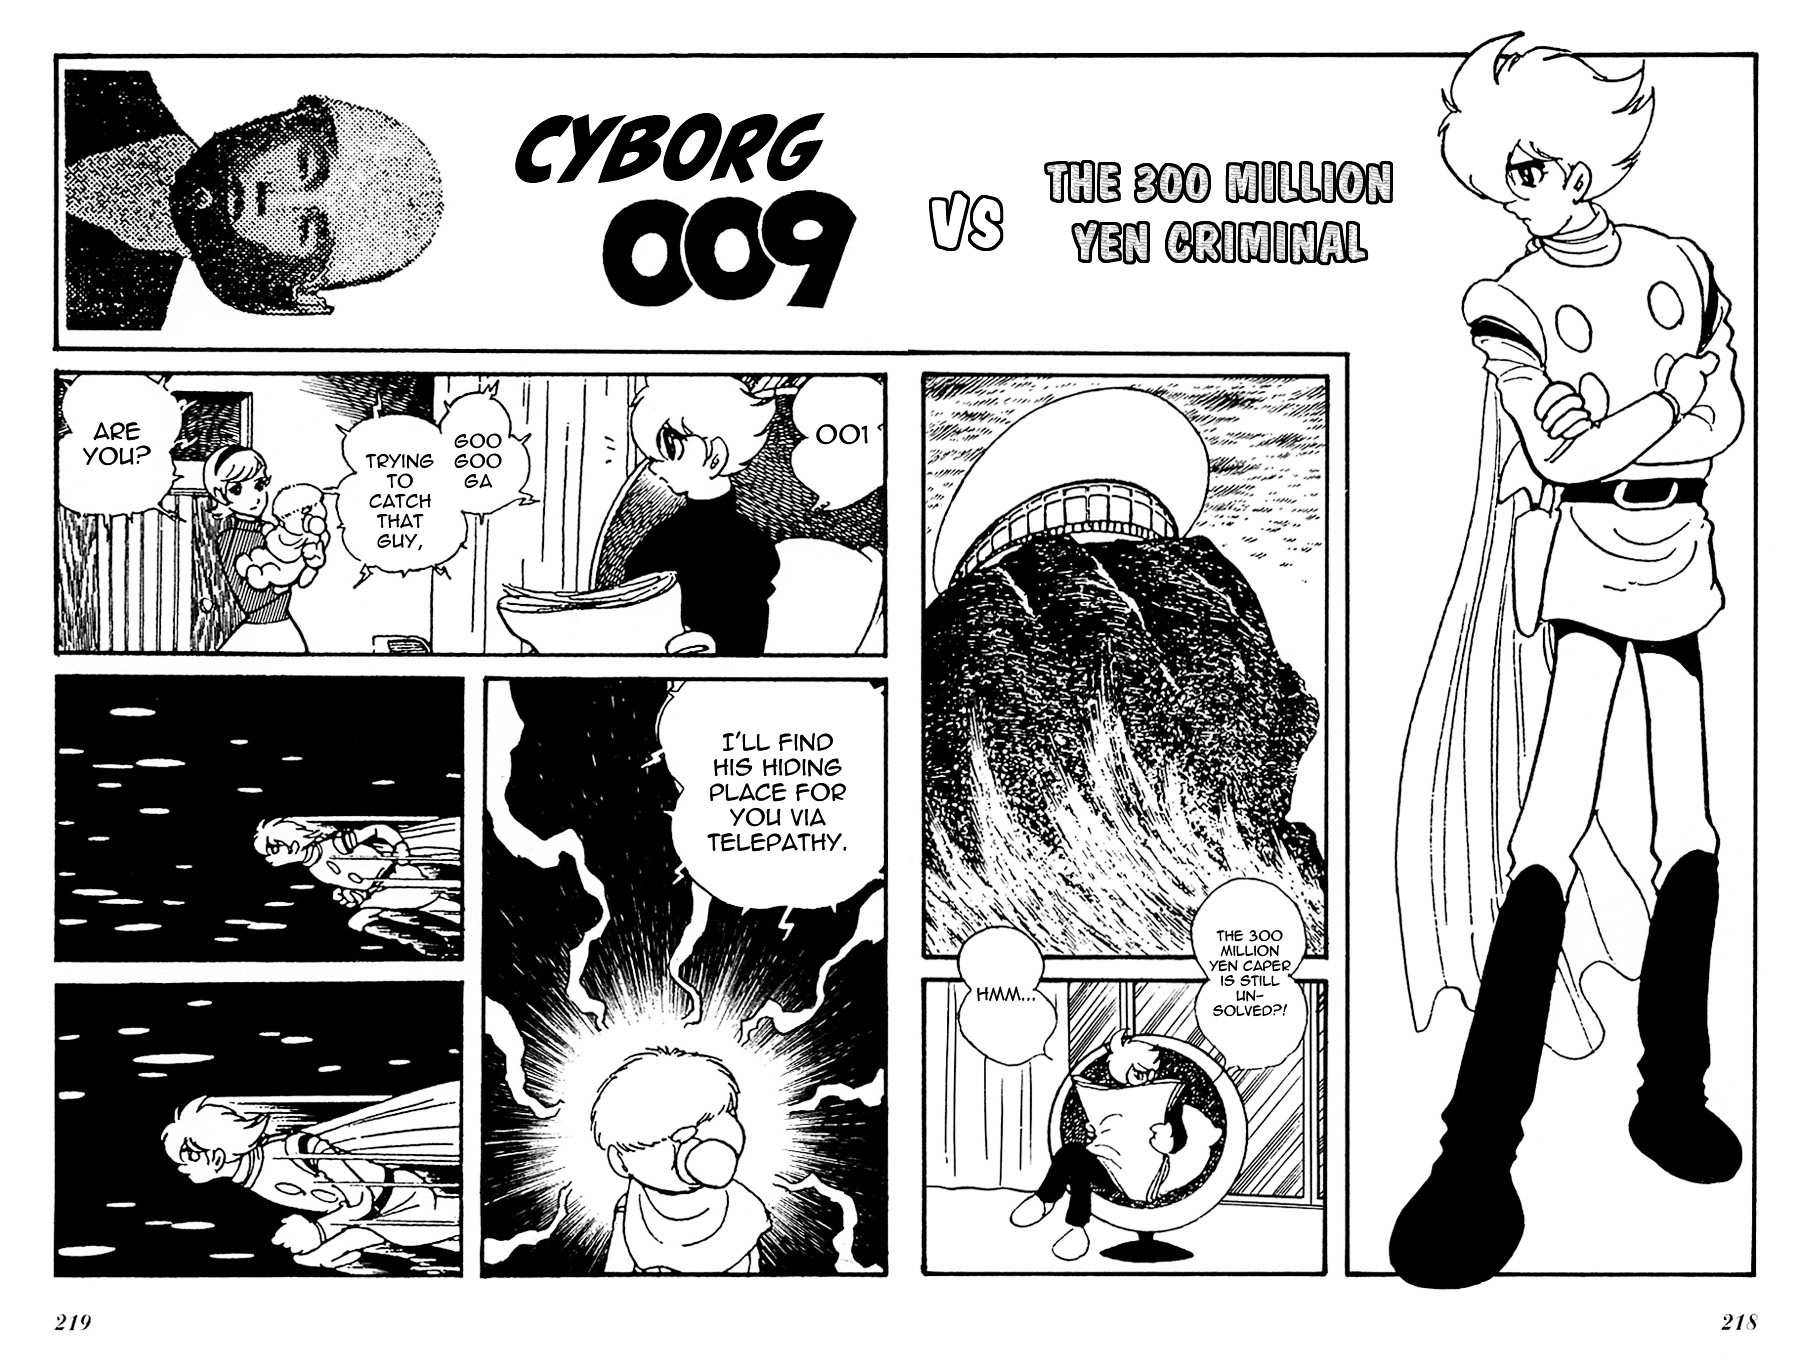 Cyborg 009 - Gold-Hen - Page 2